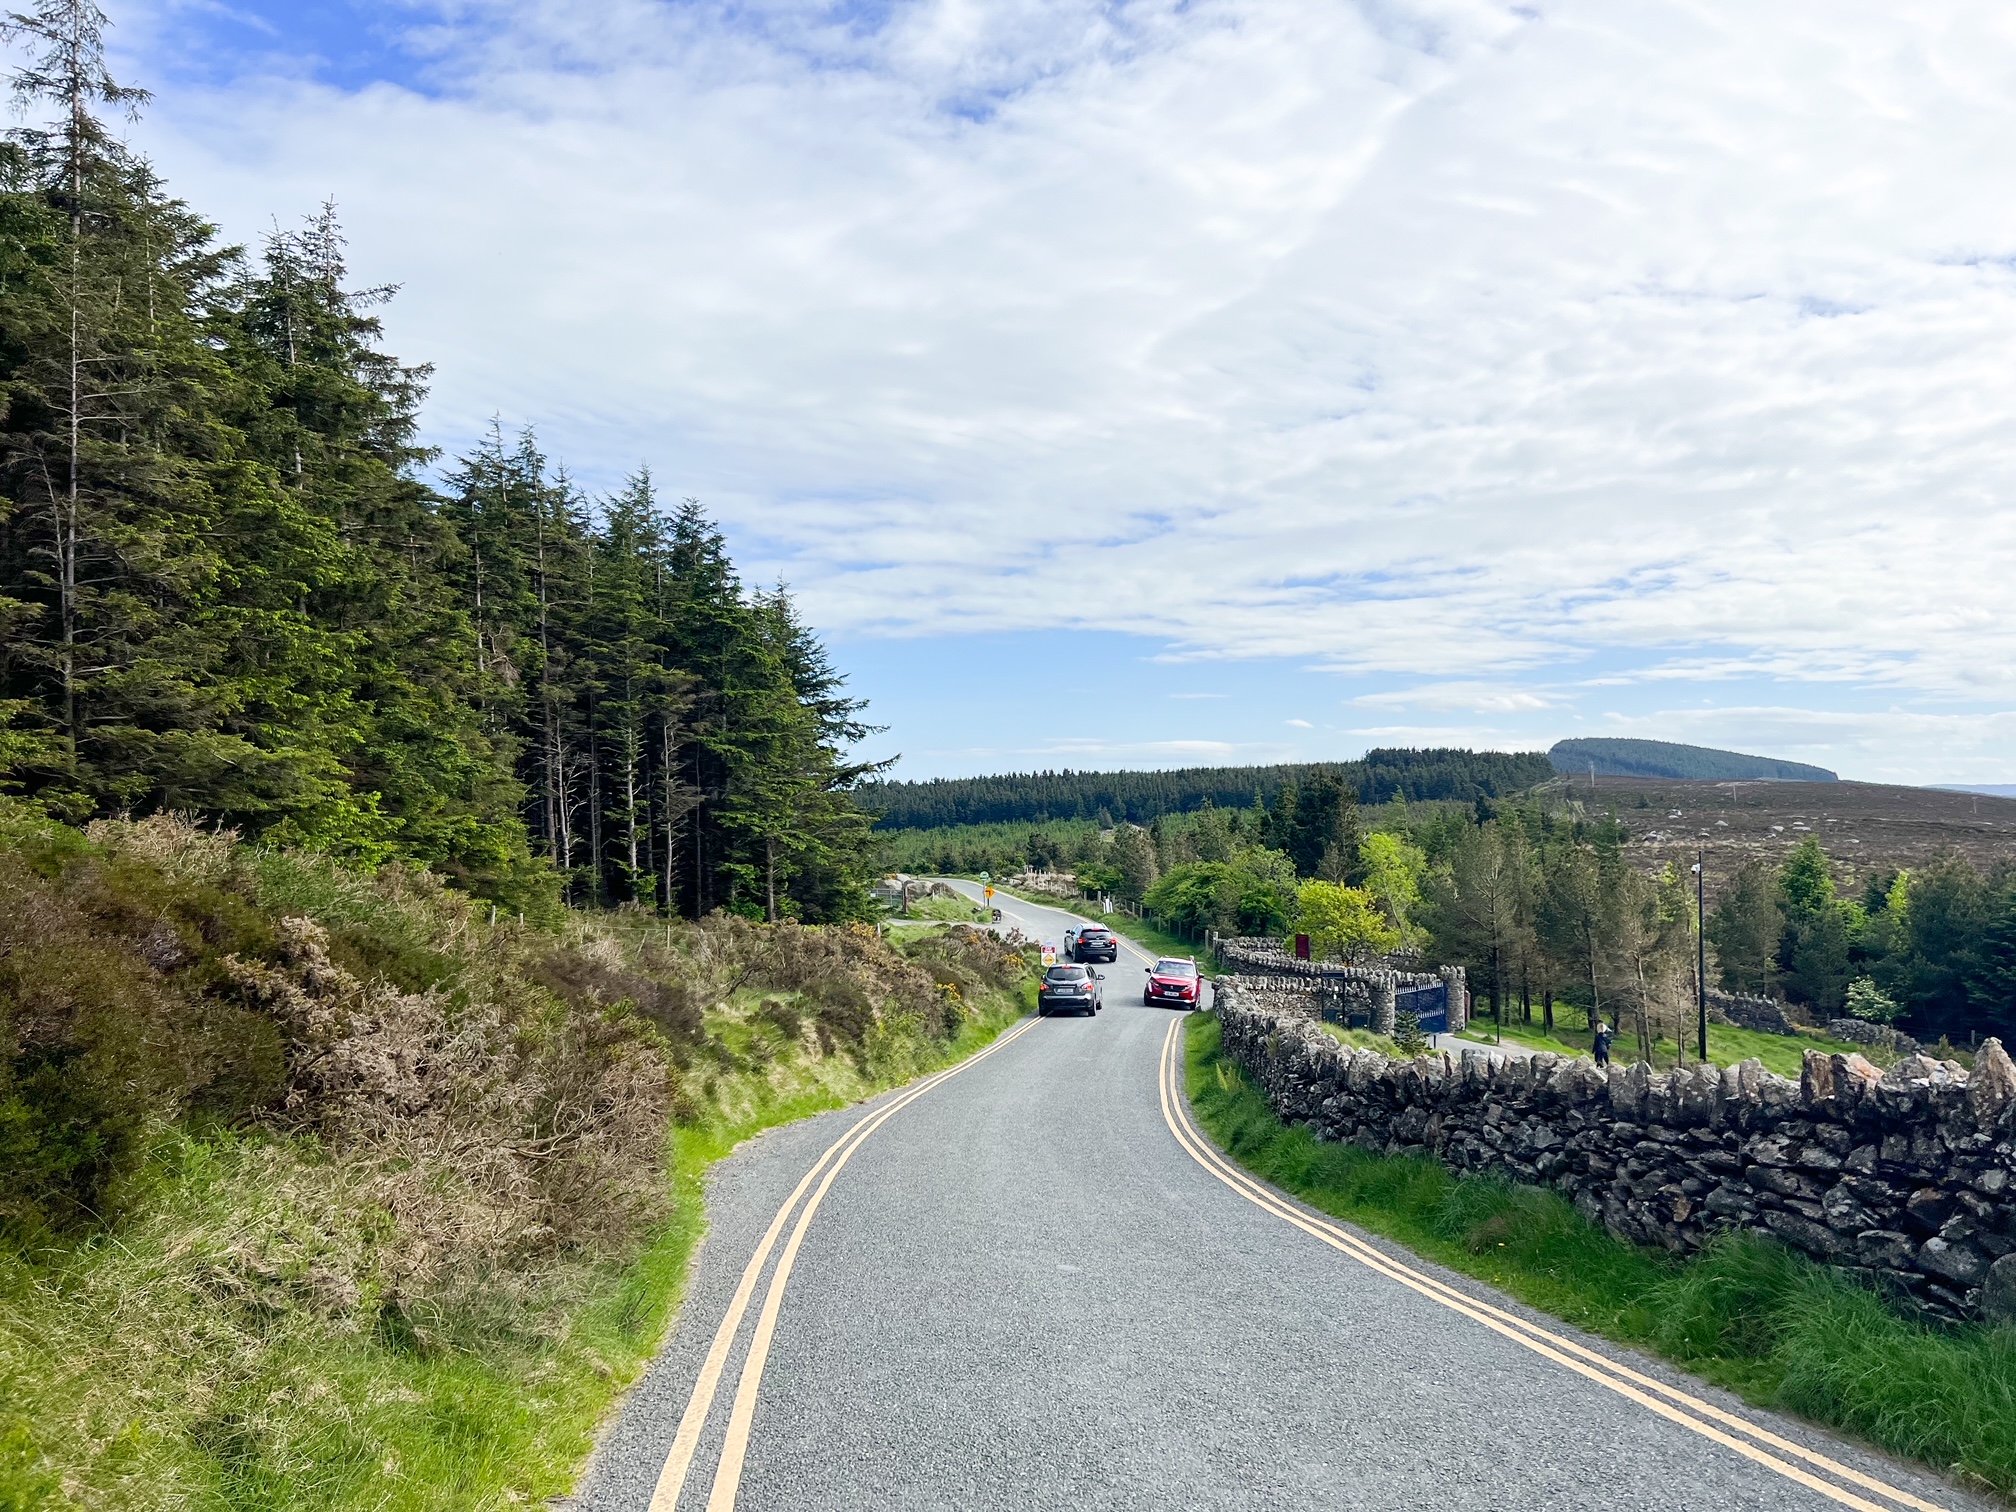 cars jammed on a road in wicklow ireland 